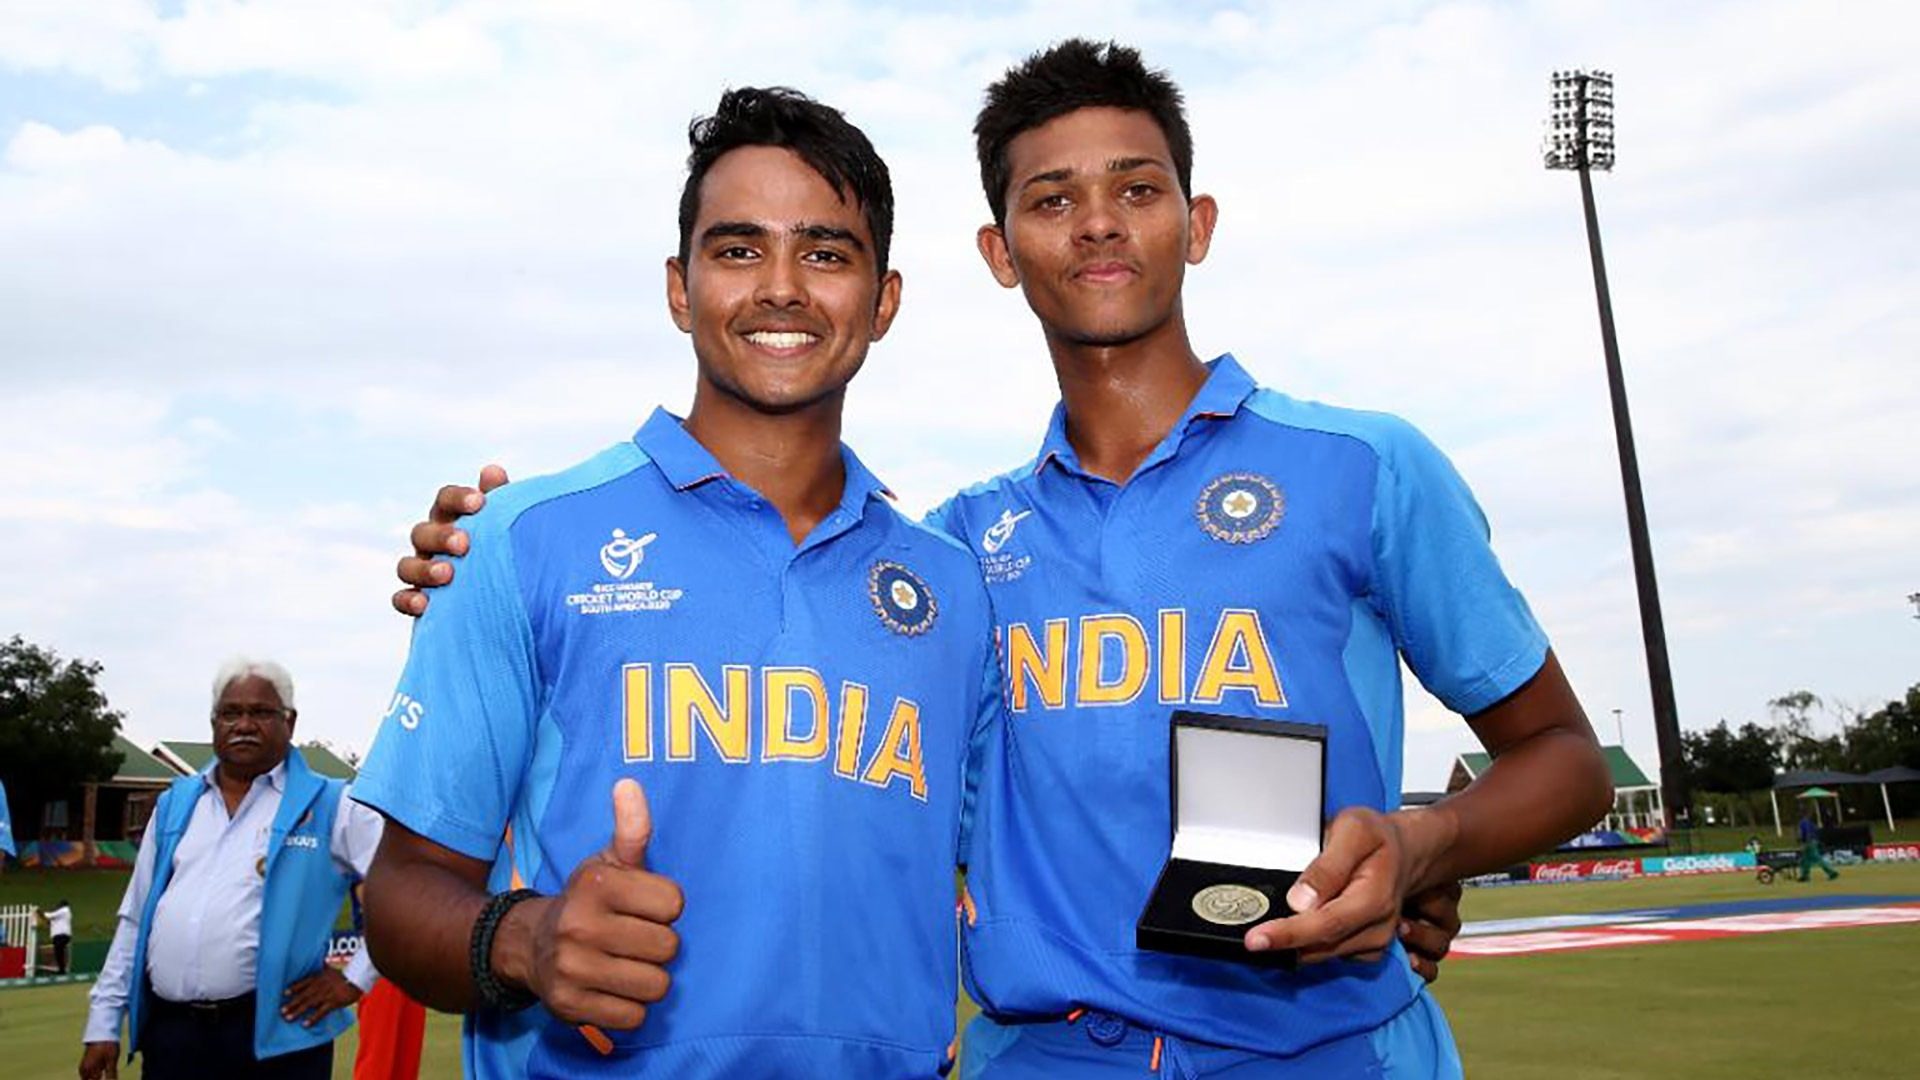 India Under 19 Predicting Their Chances In The Finals Of The Icc Under 19 World Cup